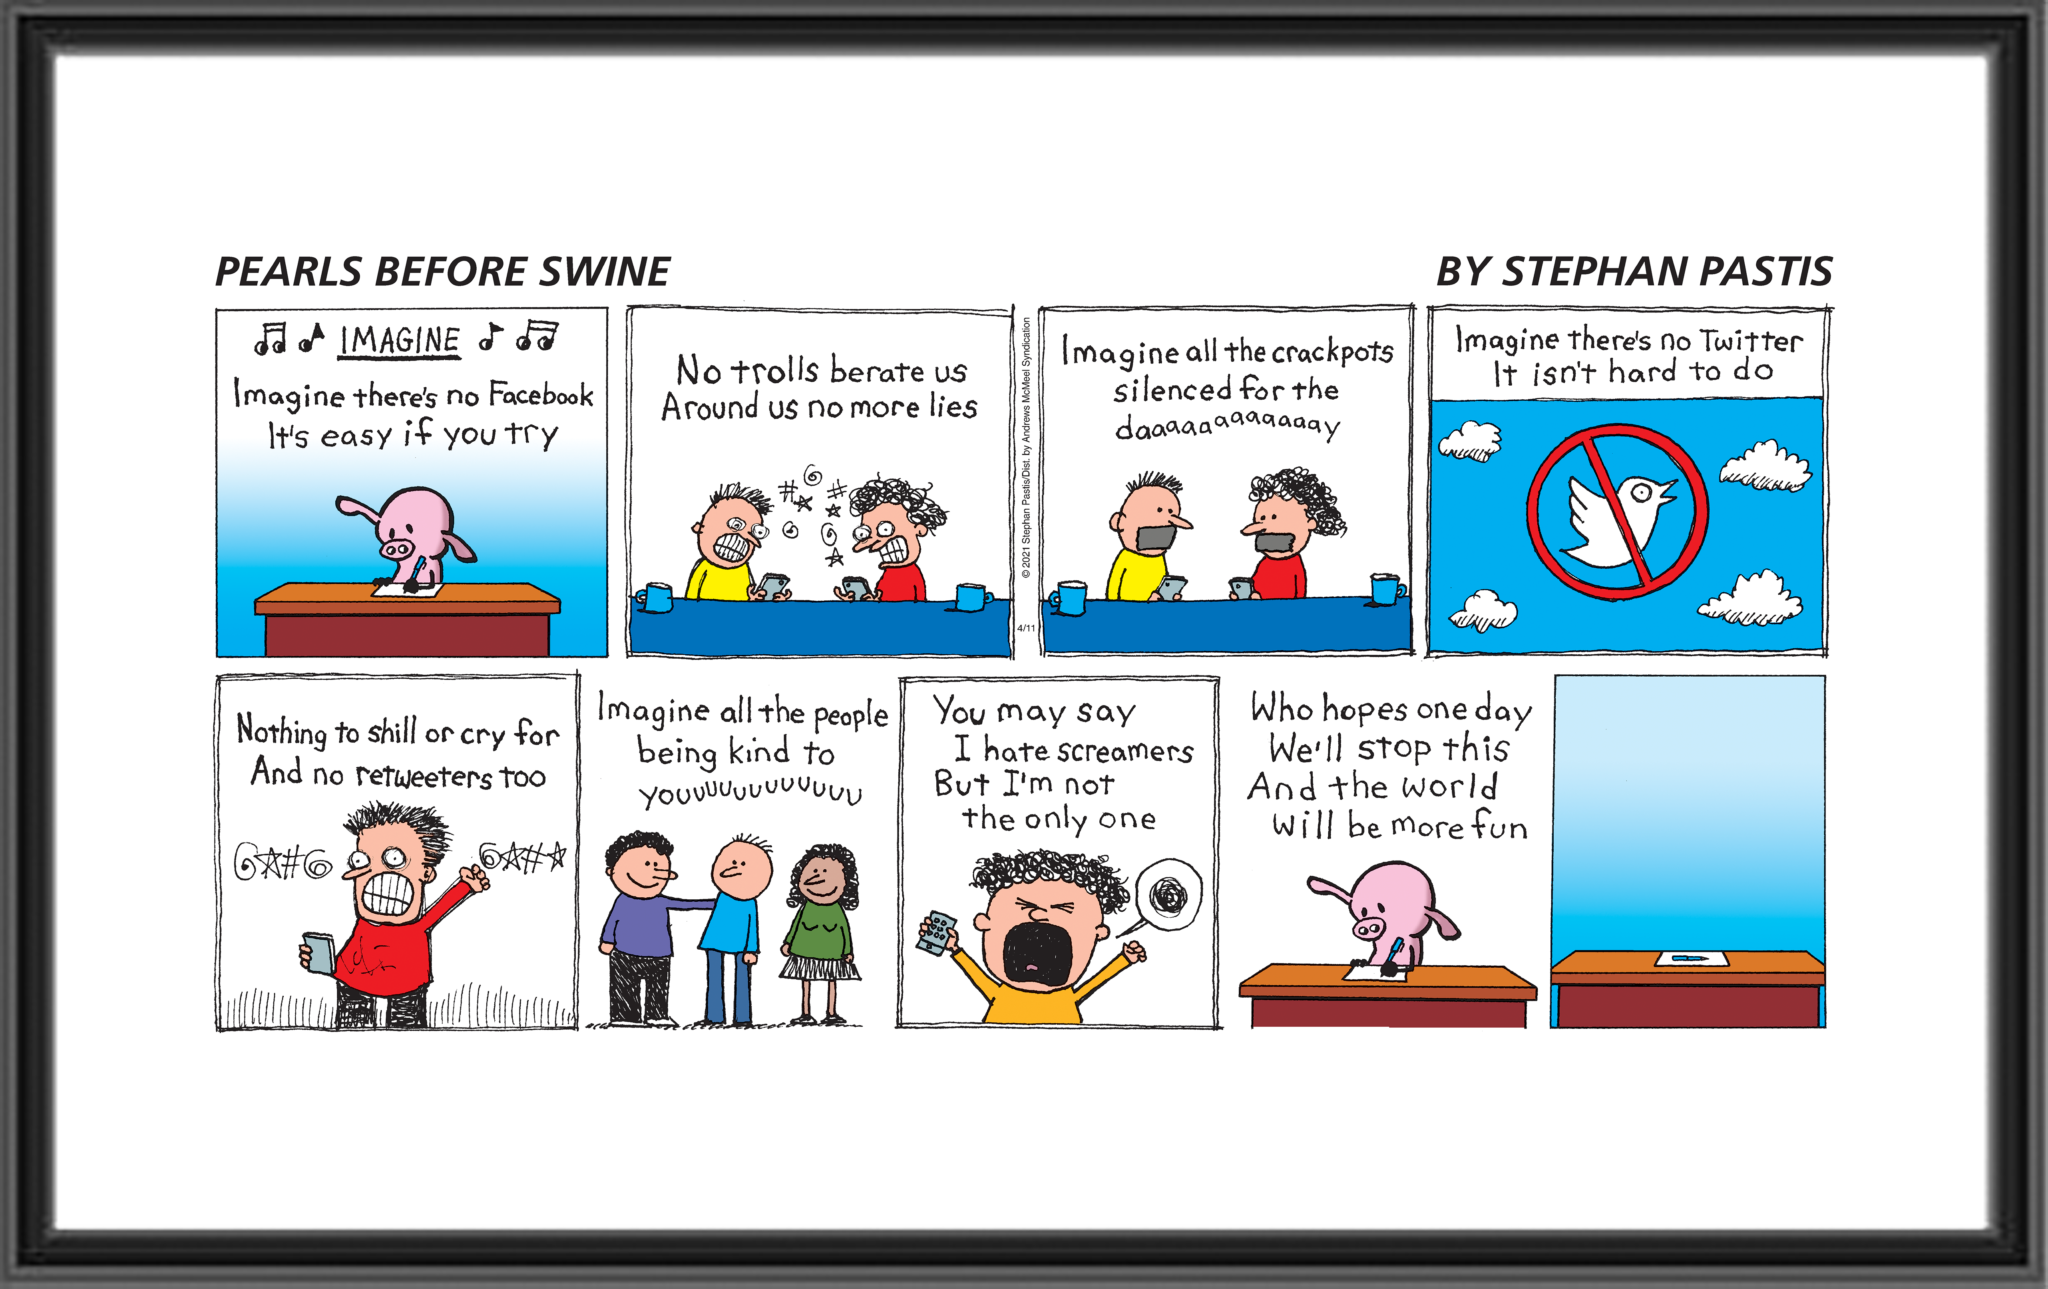 pearls-before-swine-what-is-the-meaning-of-this-interesting-term-7esl